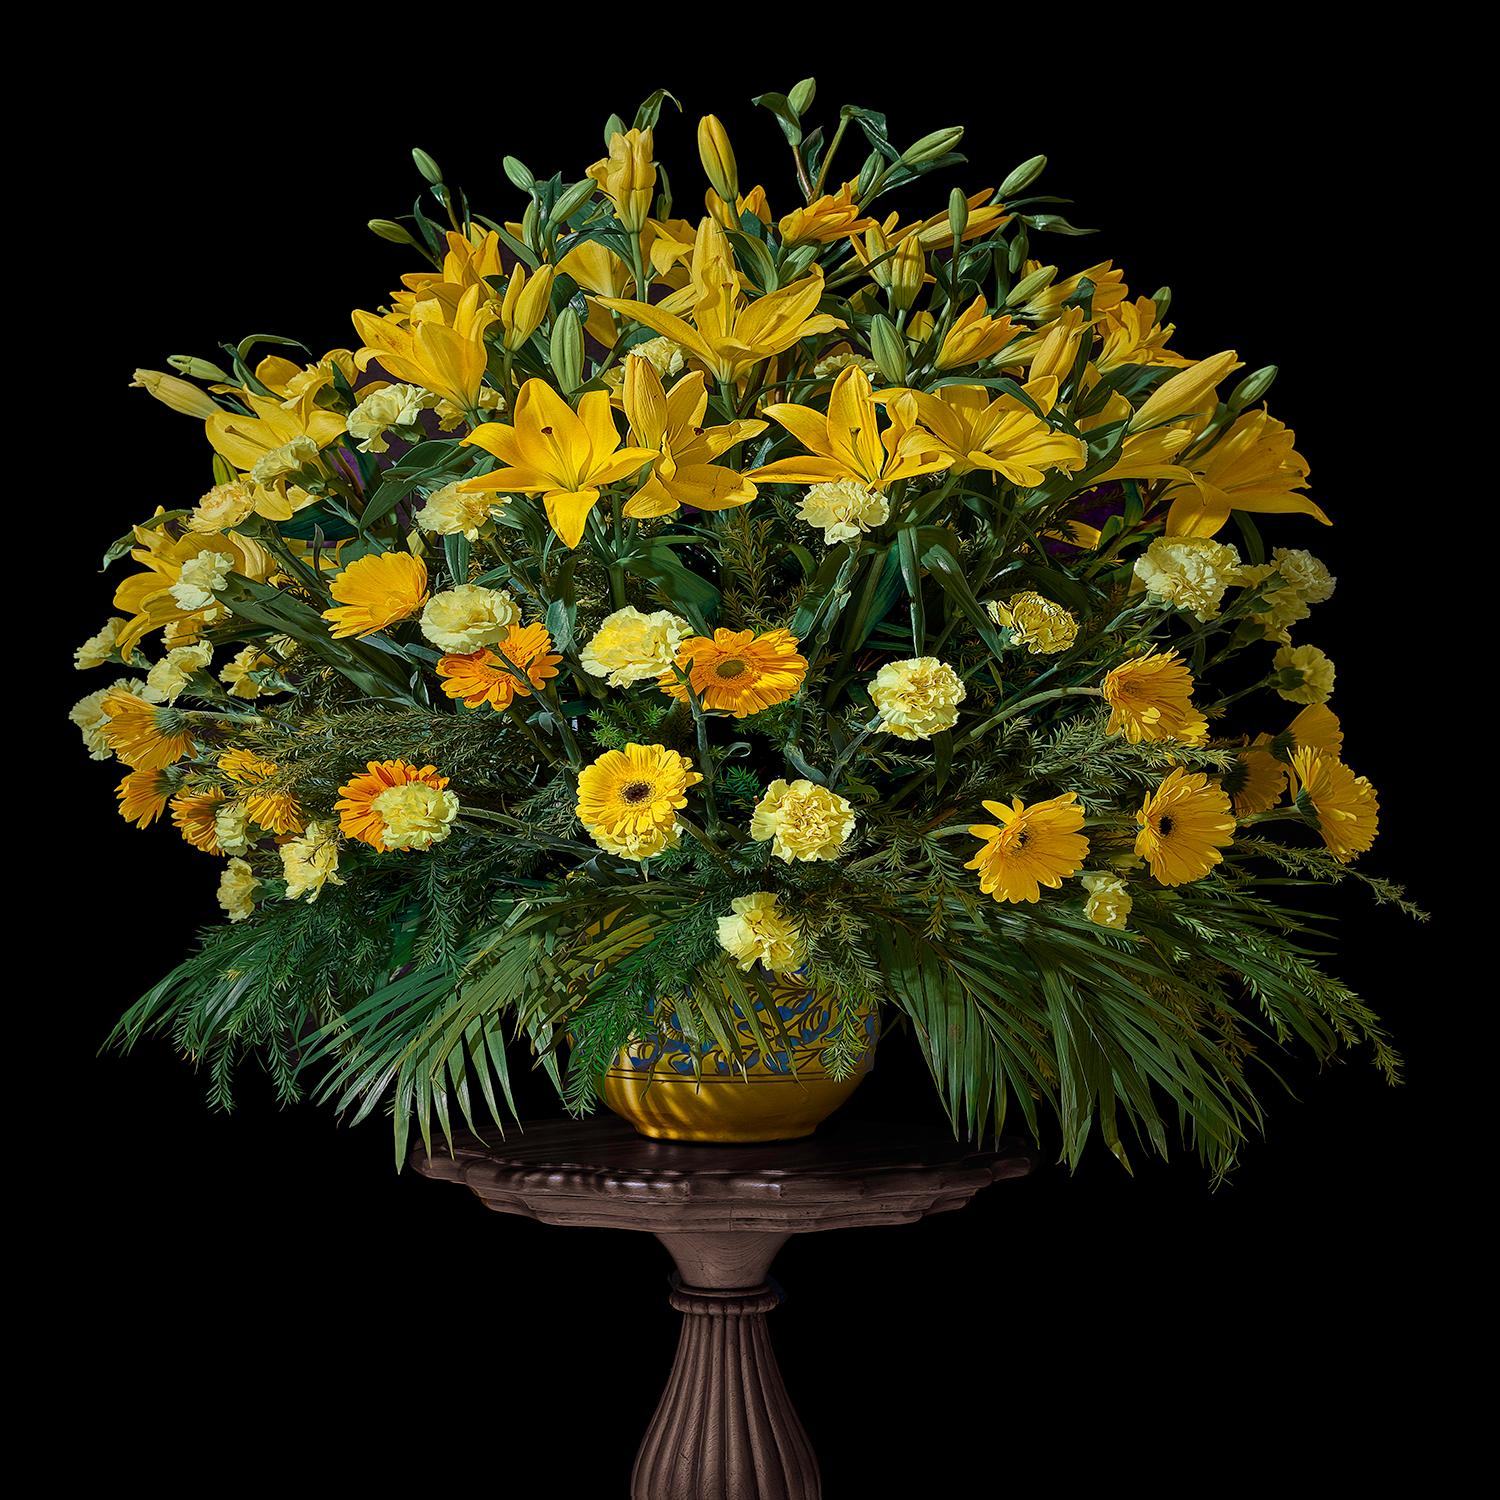 T.M. Glass Still-Life Photograph - Jaipur Wedding Bouquet with Lilies, Marigolds, and Carnations